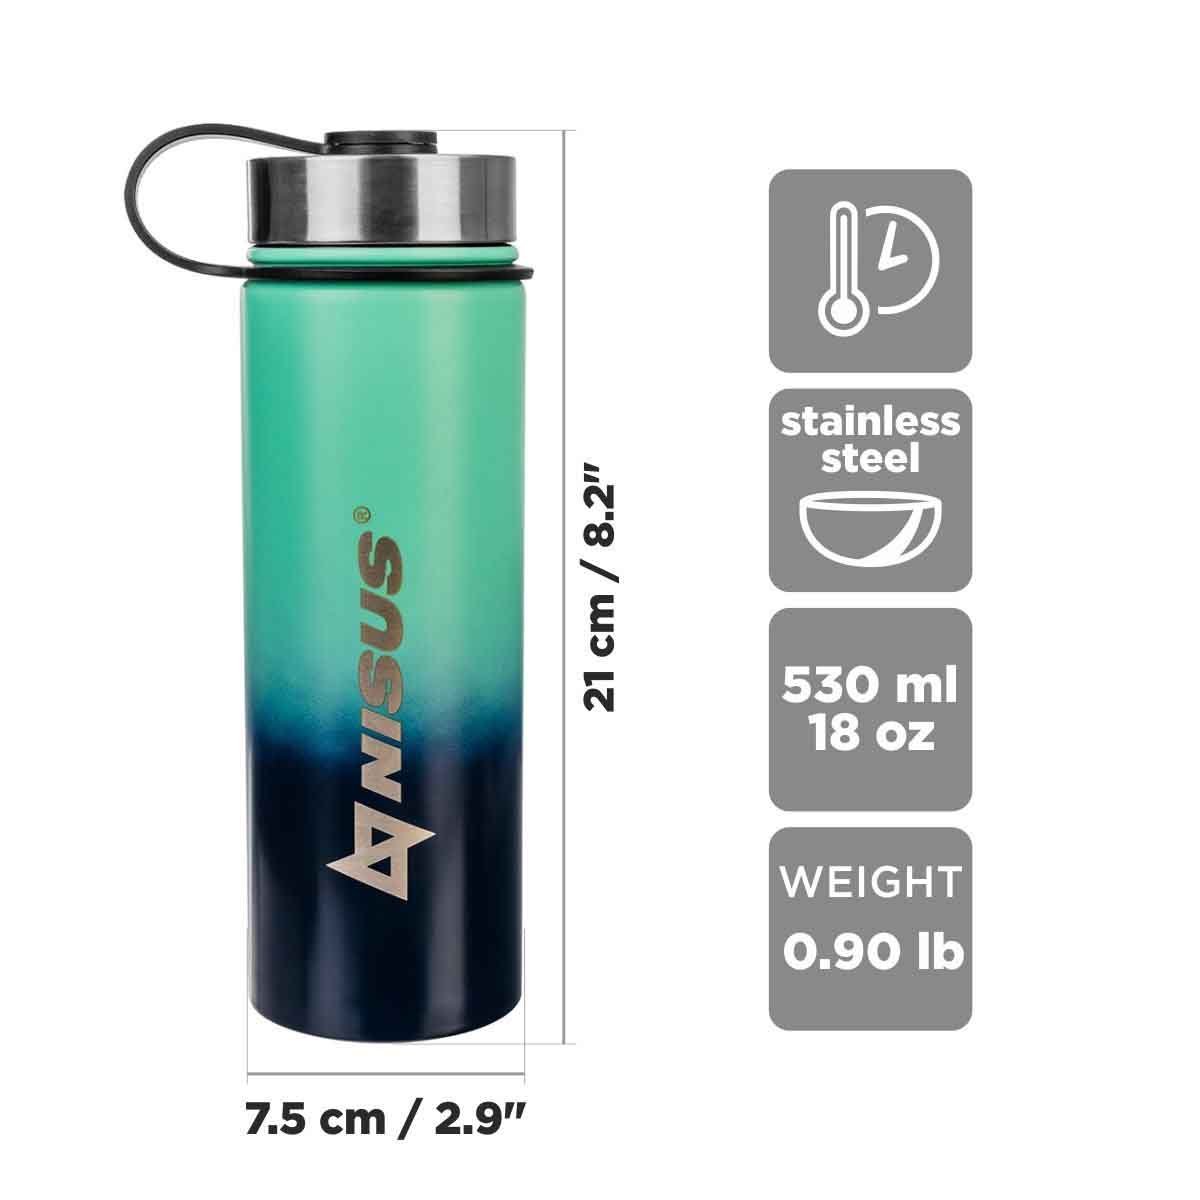 Stainless Steel Insulated Sport Water Bottle with 3 Lid Types, 18 oz is 8.2 inches high and 2.9 inches wide and weighs only 0,9 lbs